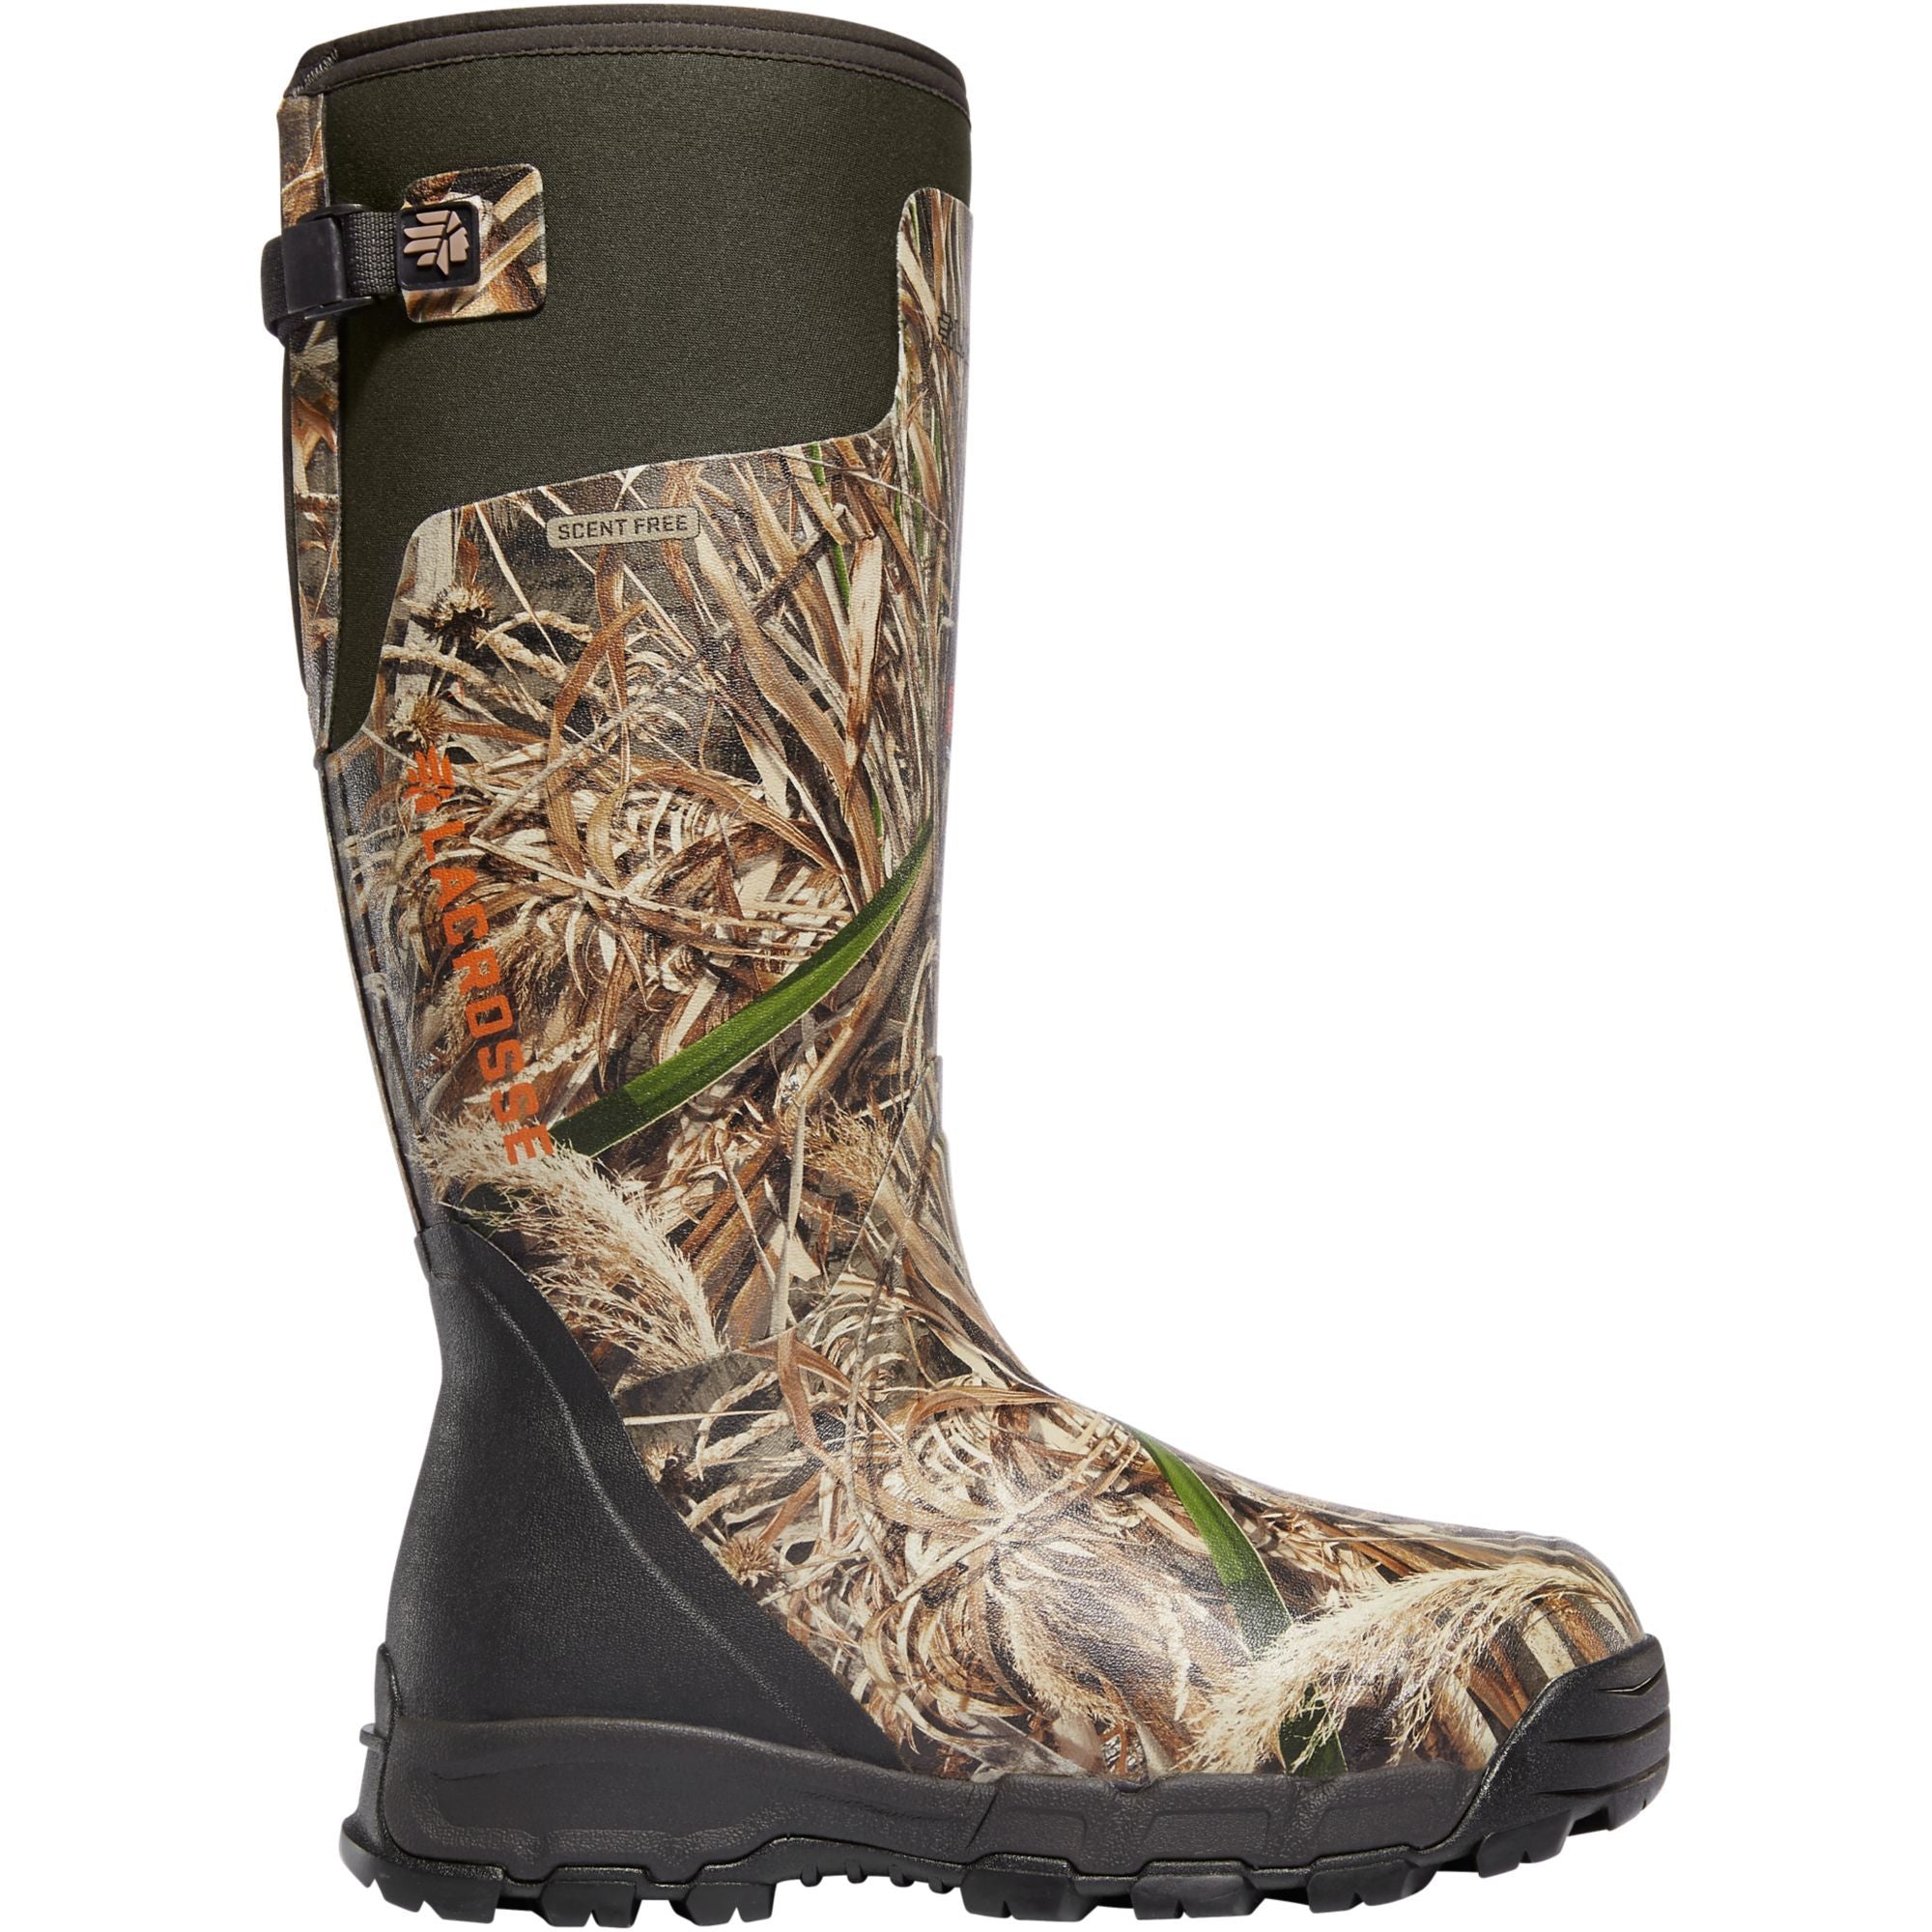 LaCrosse Men's Alphaburly Pro 18" Insulated Rubber Hunt Boot - 376021 7 / Realtree Max - Overlook Boots